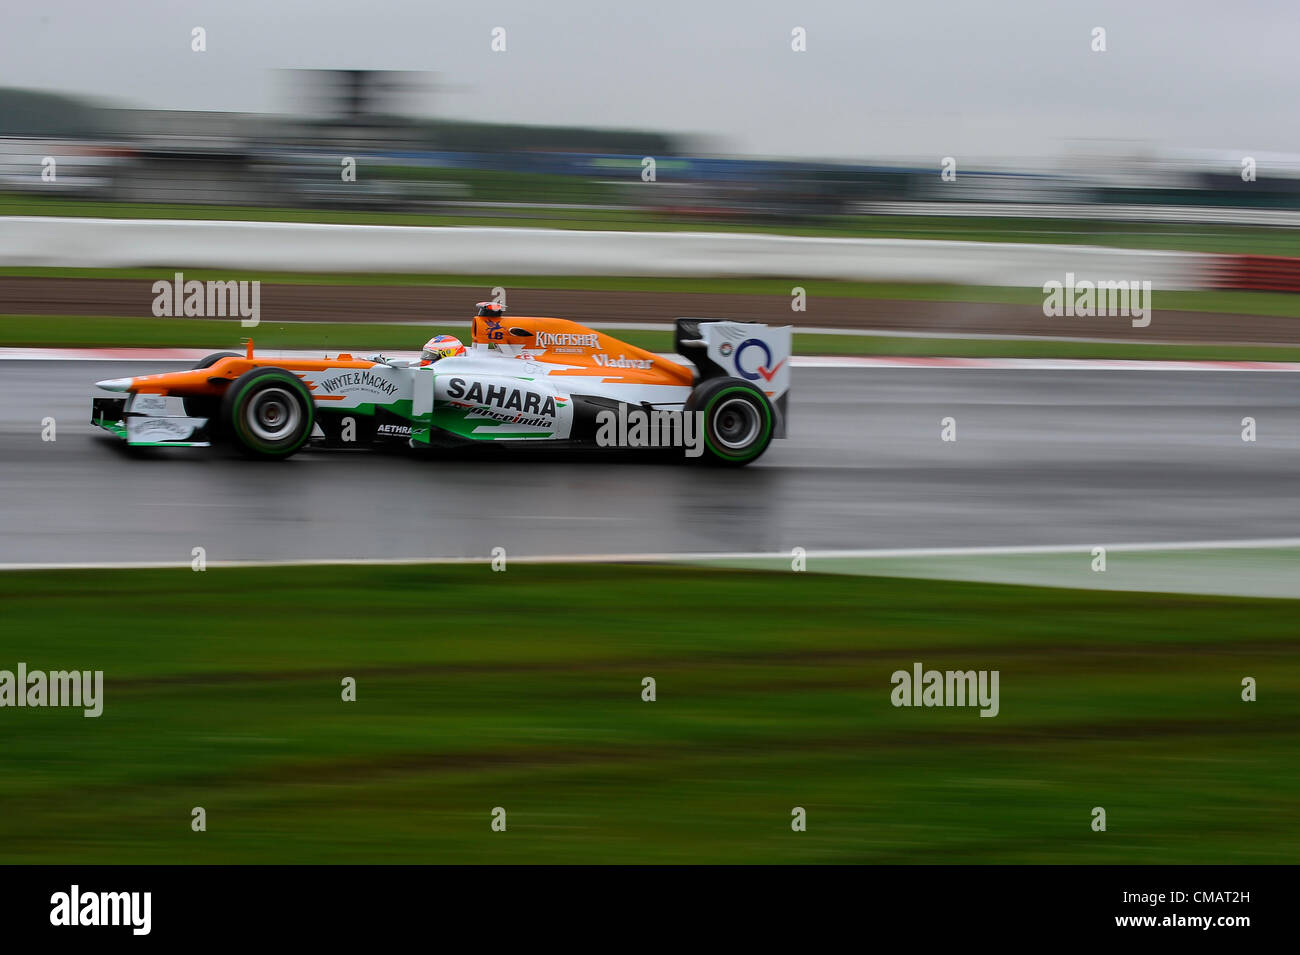 06.07.2012 Towcester, England. Paul di Resta of Britain and Sahara Force India F1 Team in action during Free Practice 2 on the Friday of the Santander British Grand Prix, Round 9 of the 2012 FIA Formula 1 World Championship at Silverstone Circuit. Stock Photo